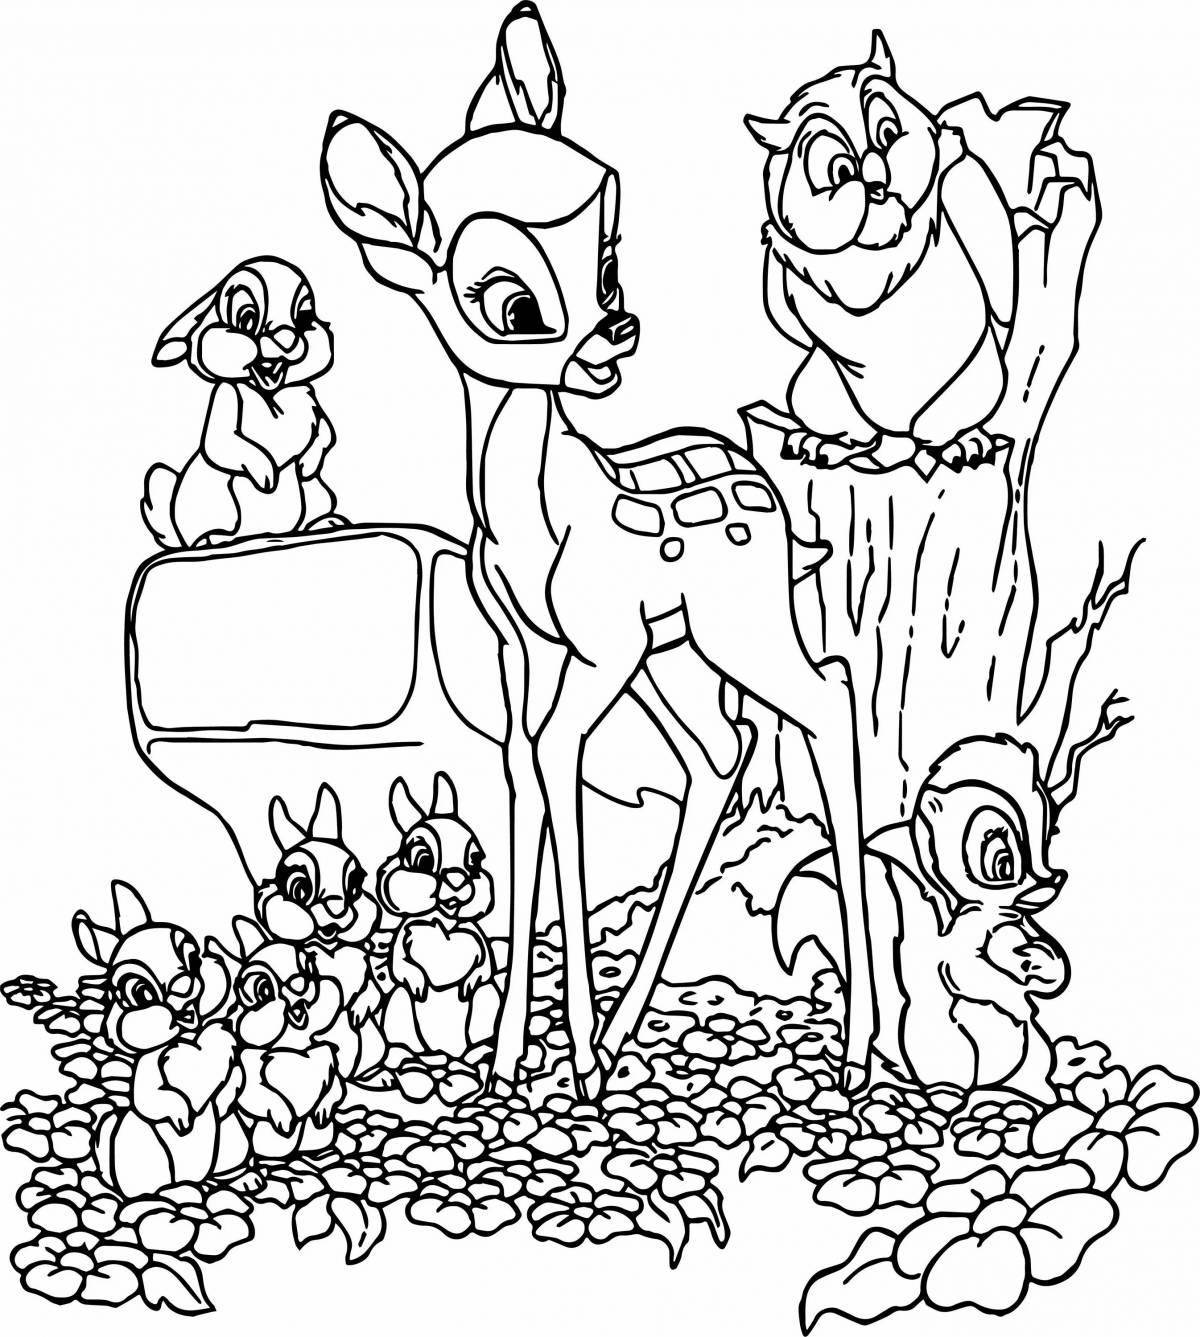 Delightful bambi coloring book for kids 3-4 years old